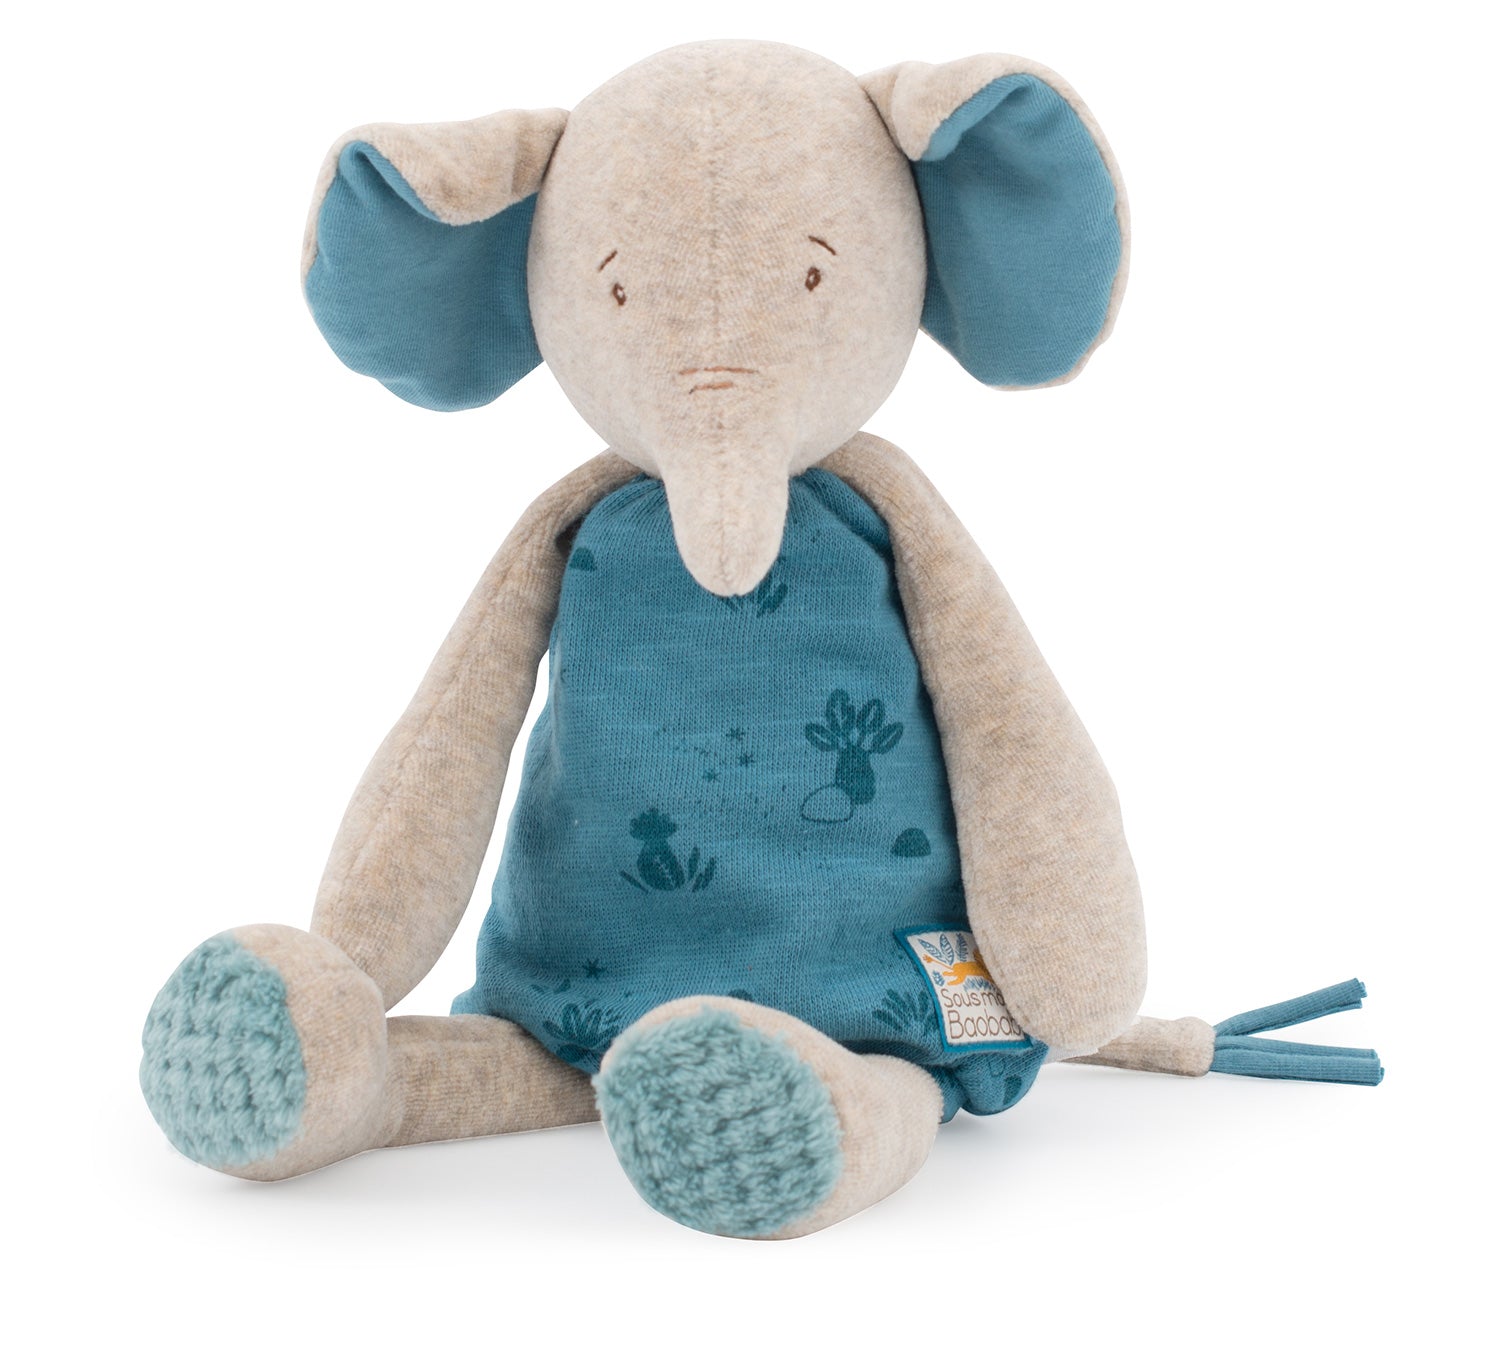 Soft blue and white cuddly elephant soft toy suitable from birth